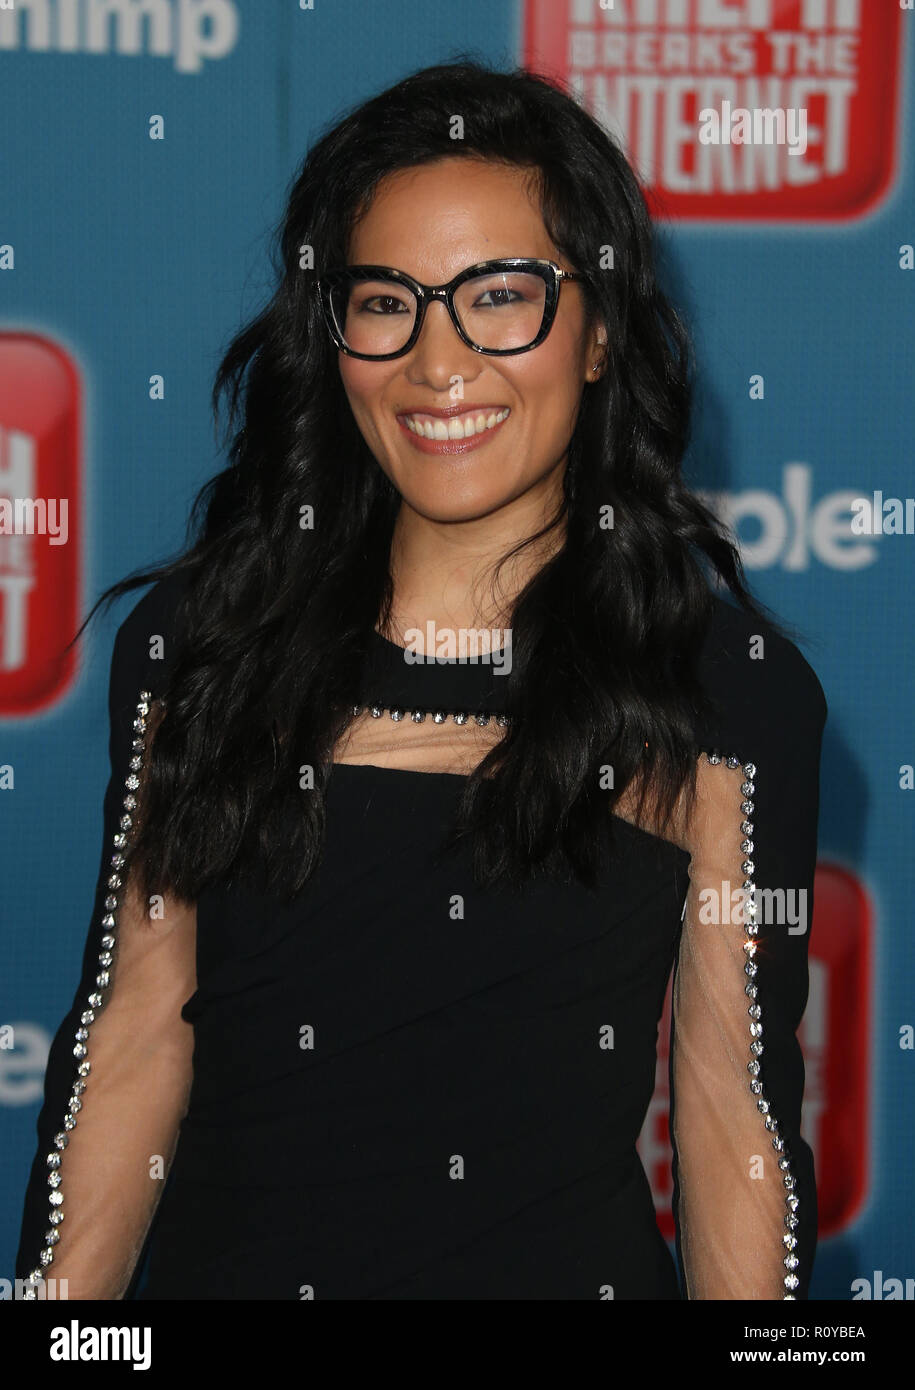 Los Angeles, California, USA. 5th Nov, 2018. Ali Wong during arrivals for the 'Ralph Breaks The Internet' Los Angeles Premiere. Credit: Faye Sadou/AdMedia/ZUMA Wire/Alamy Live News Stock Photo